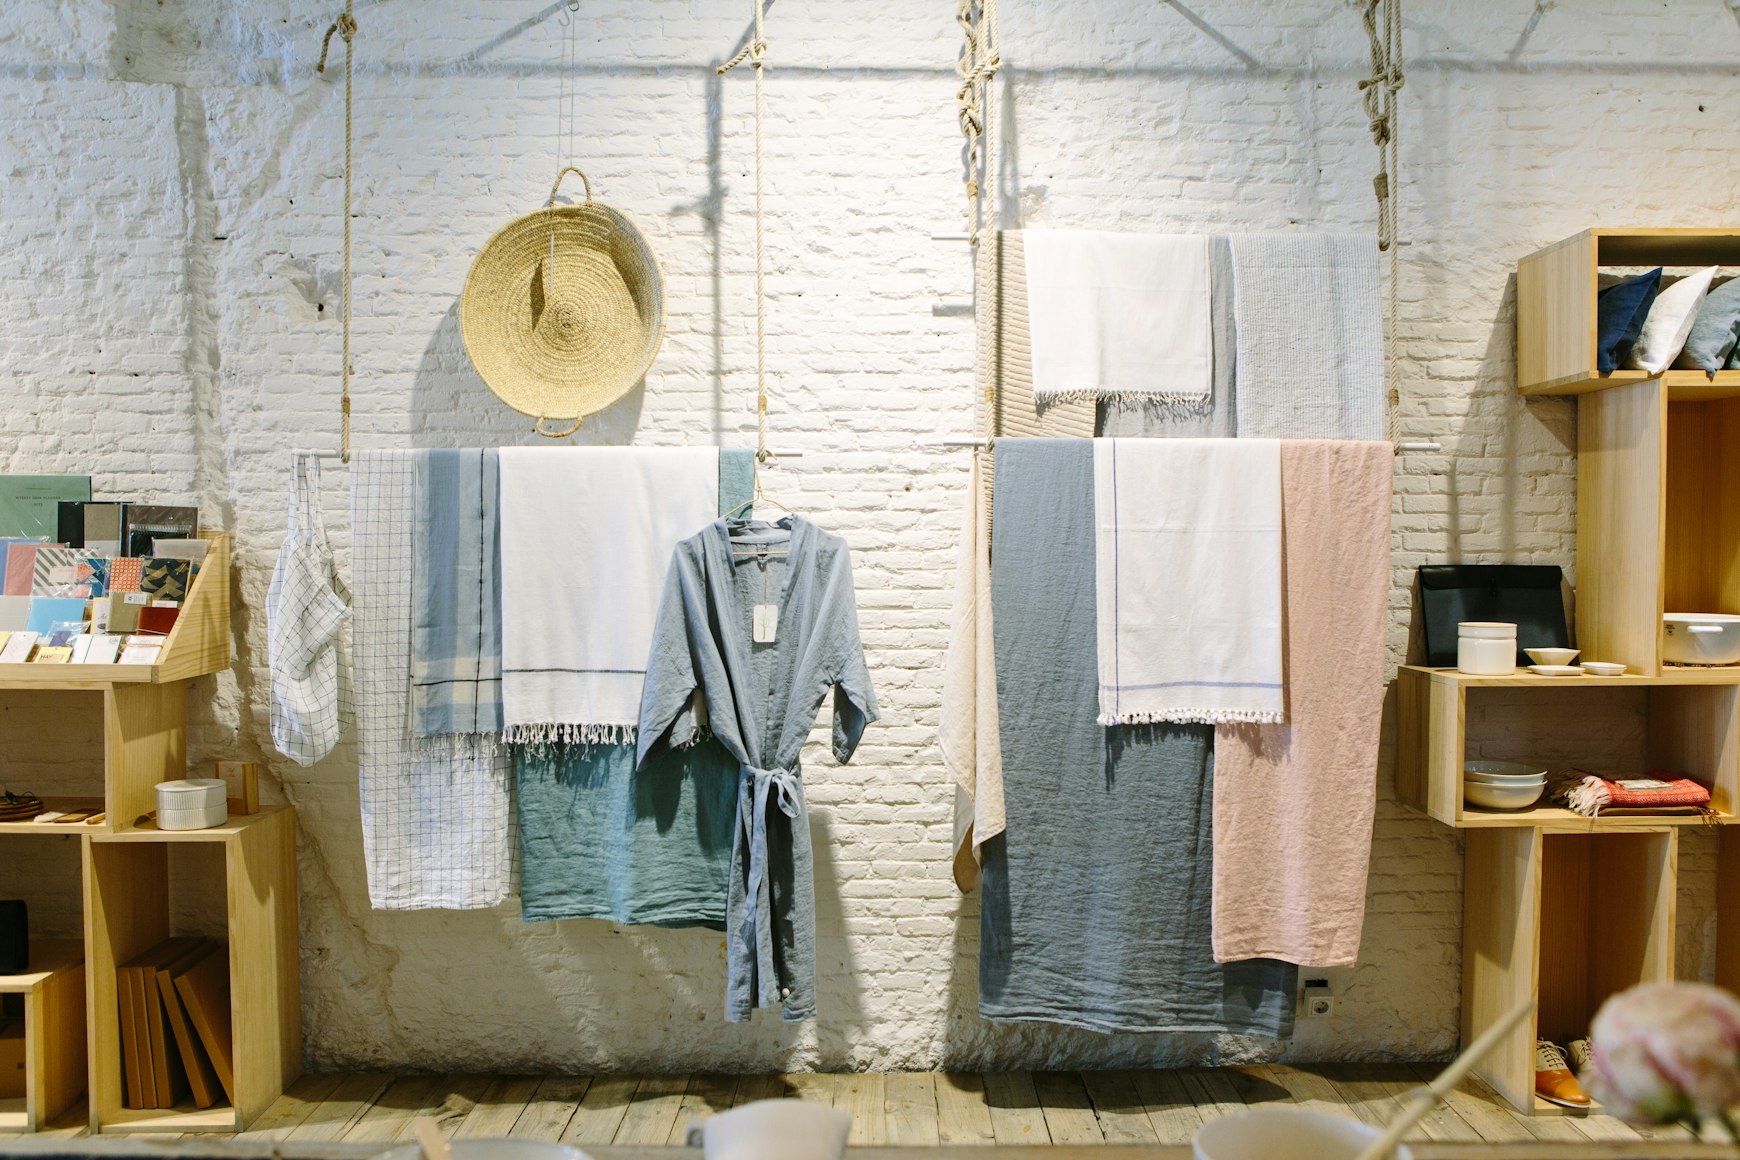 Towels and clothes on lines